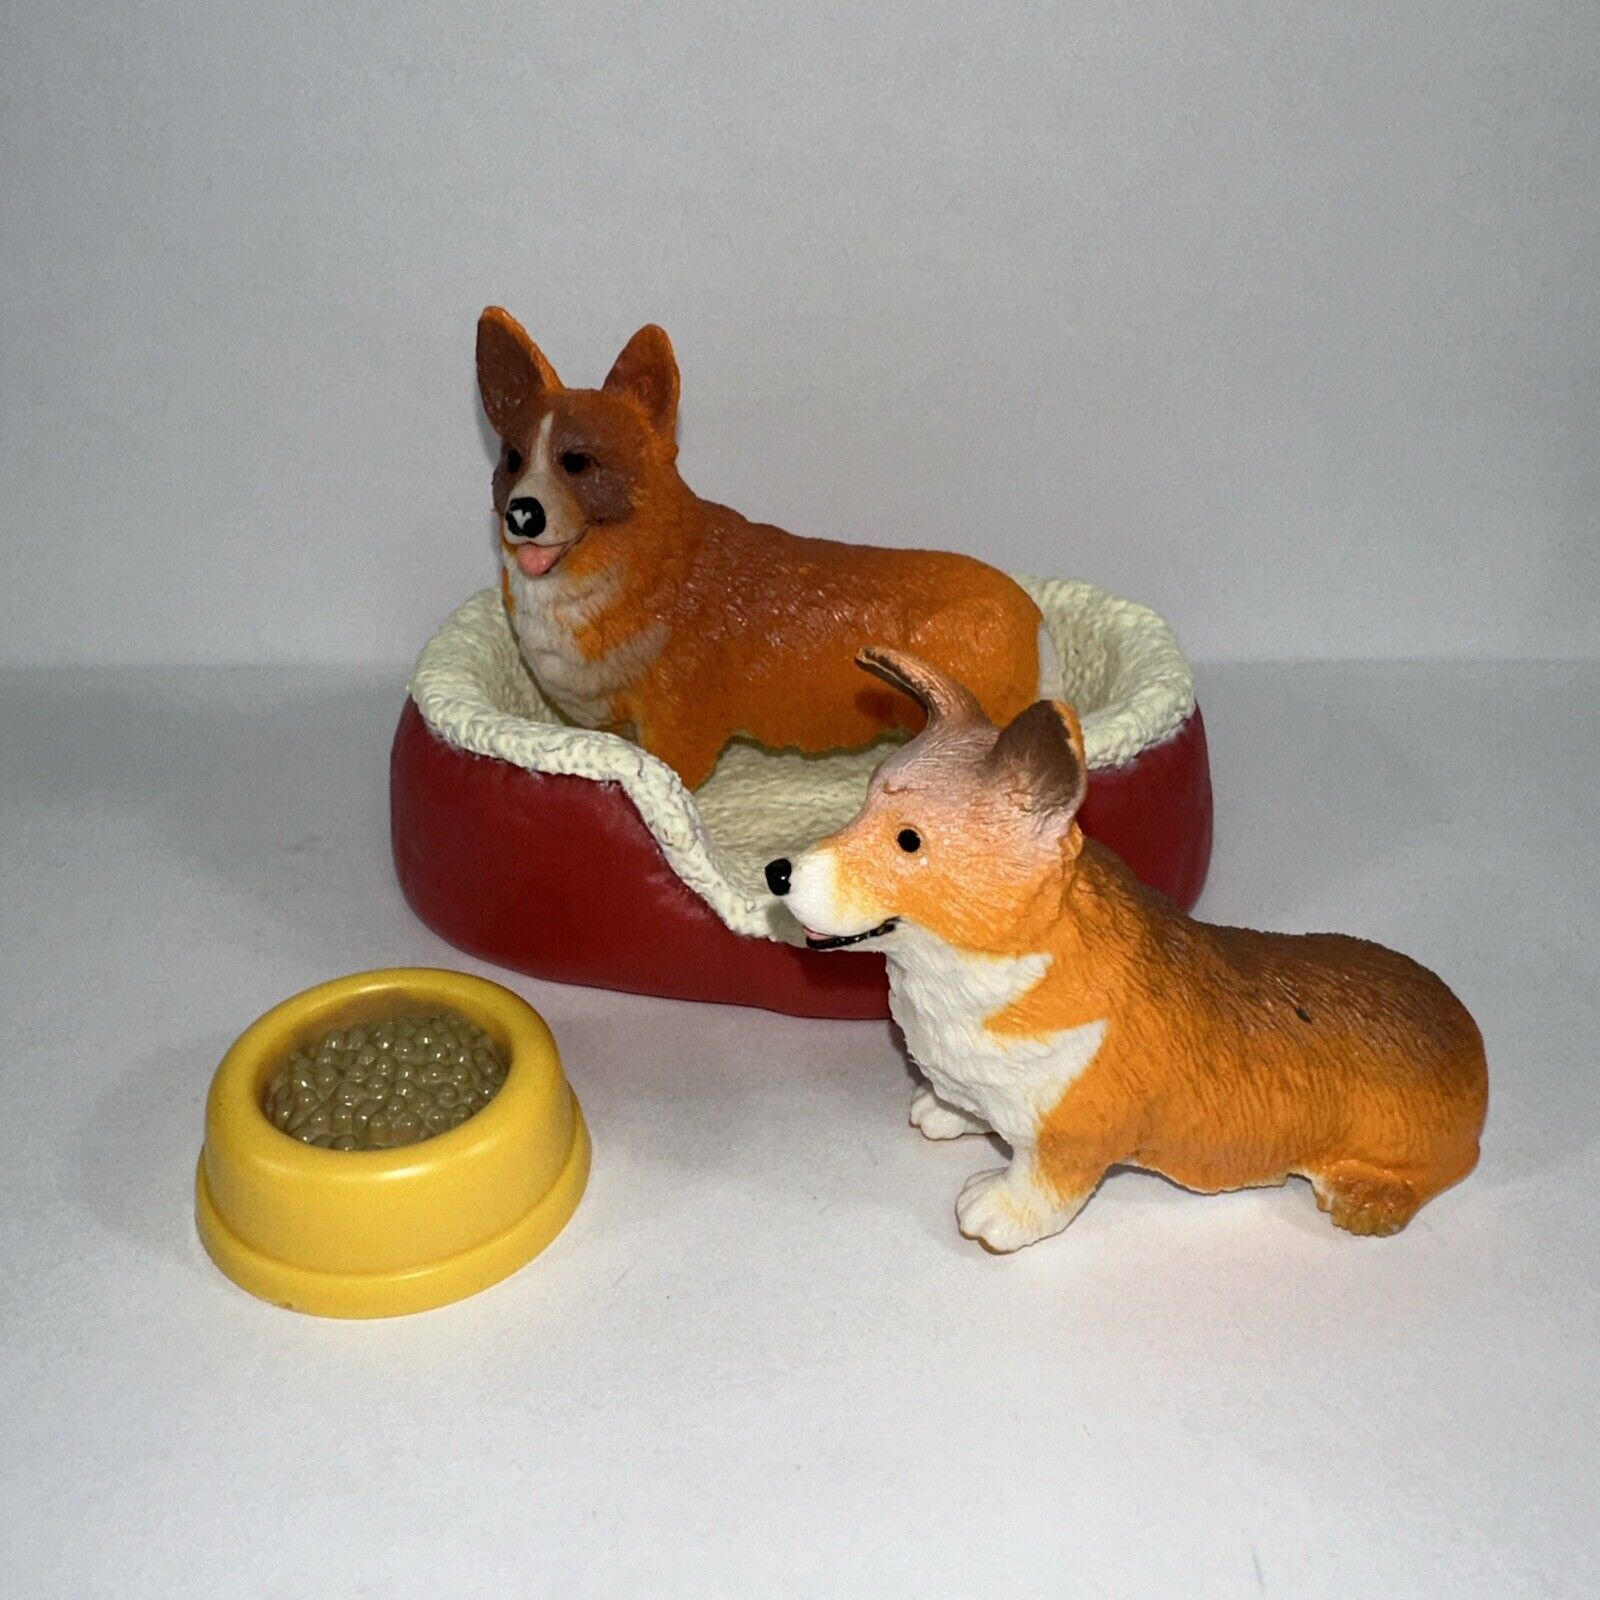 Schleich Corgi Adult Dog Figure Retired w/Extra Figure, Food Bowl & Bed Lot